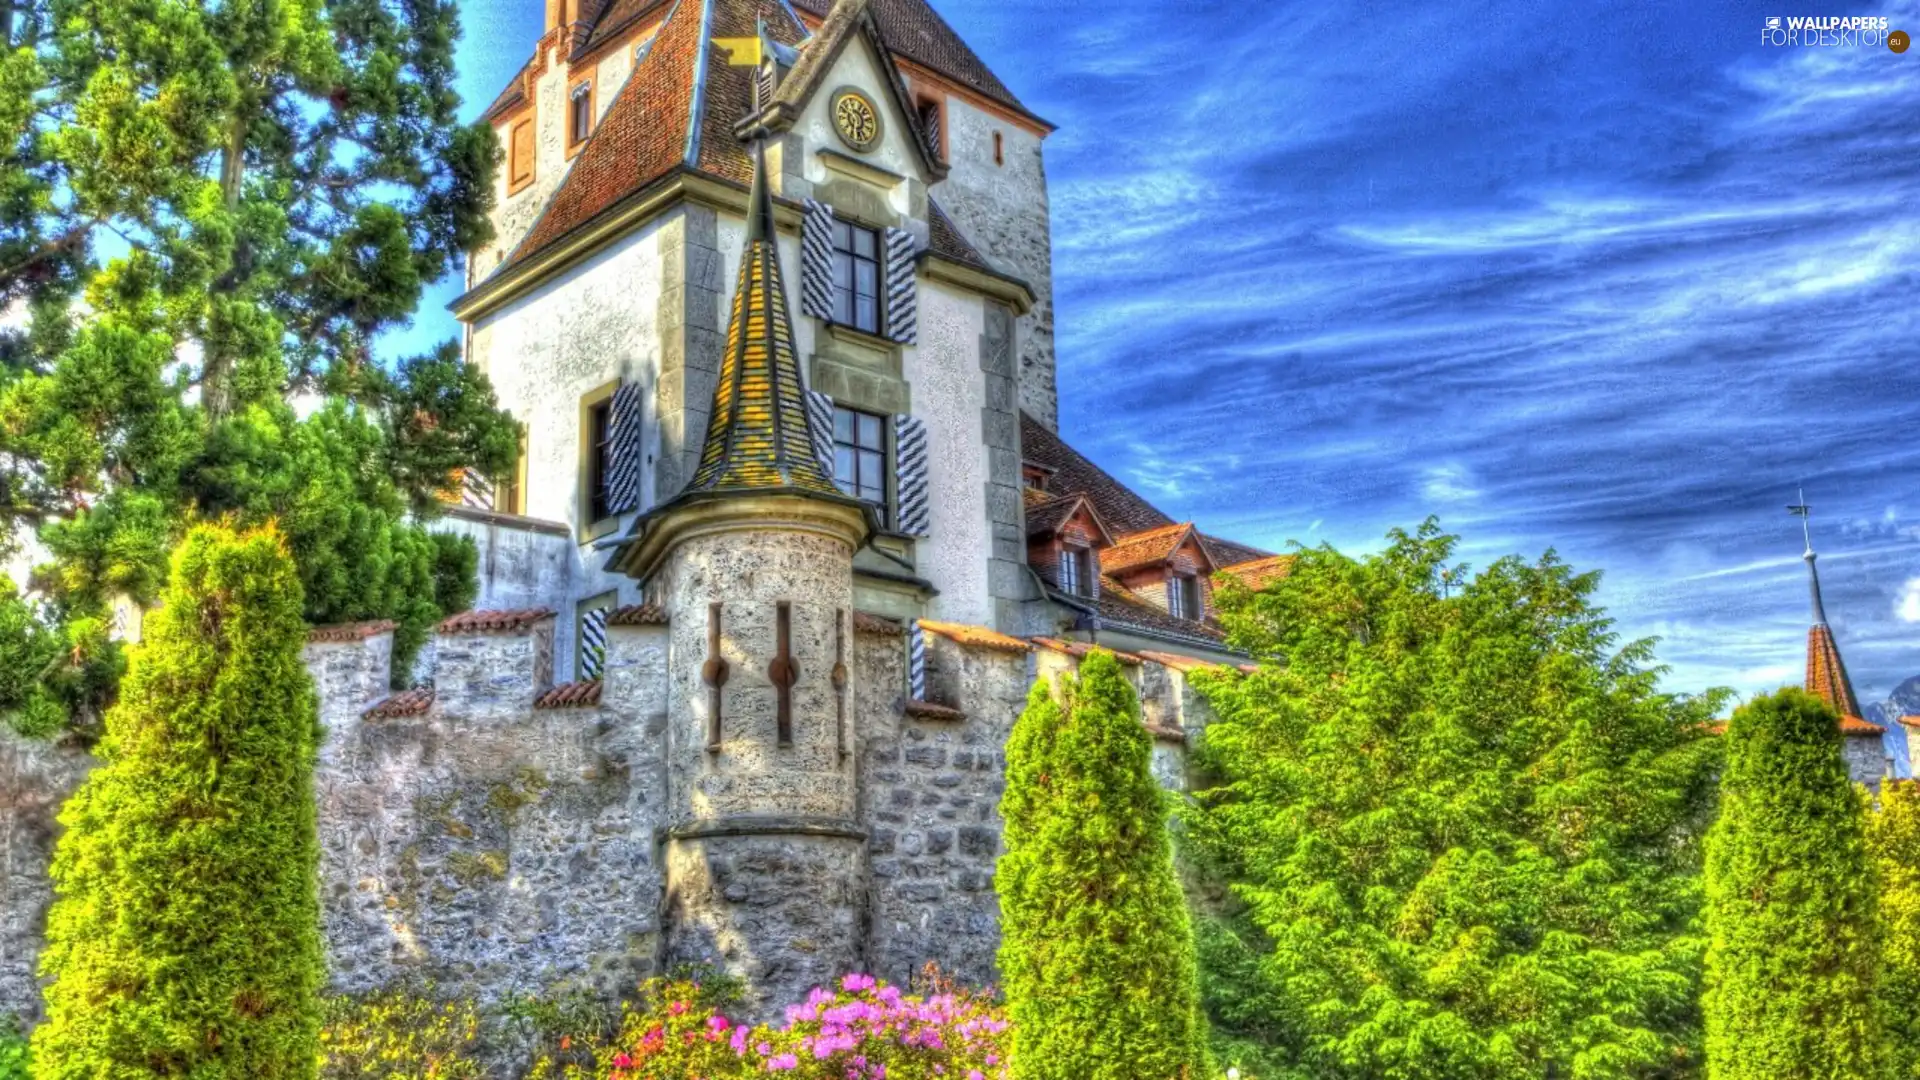 Castle, viewes, Flowers, trees